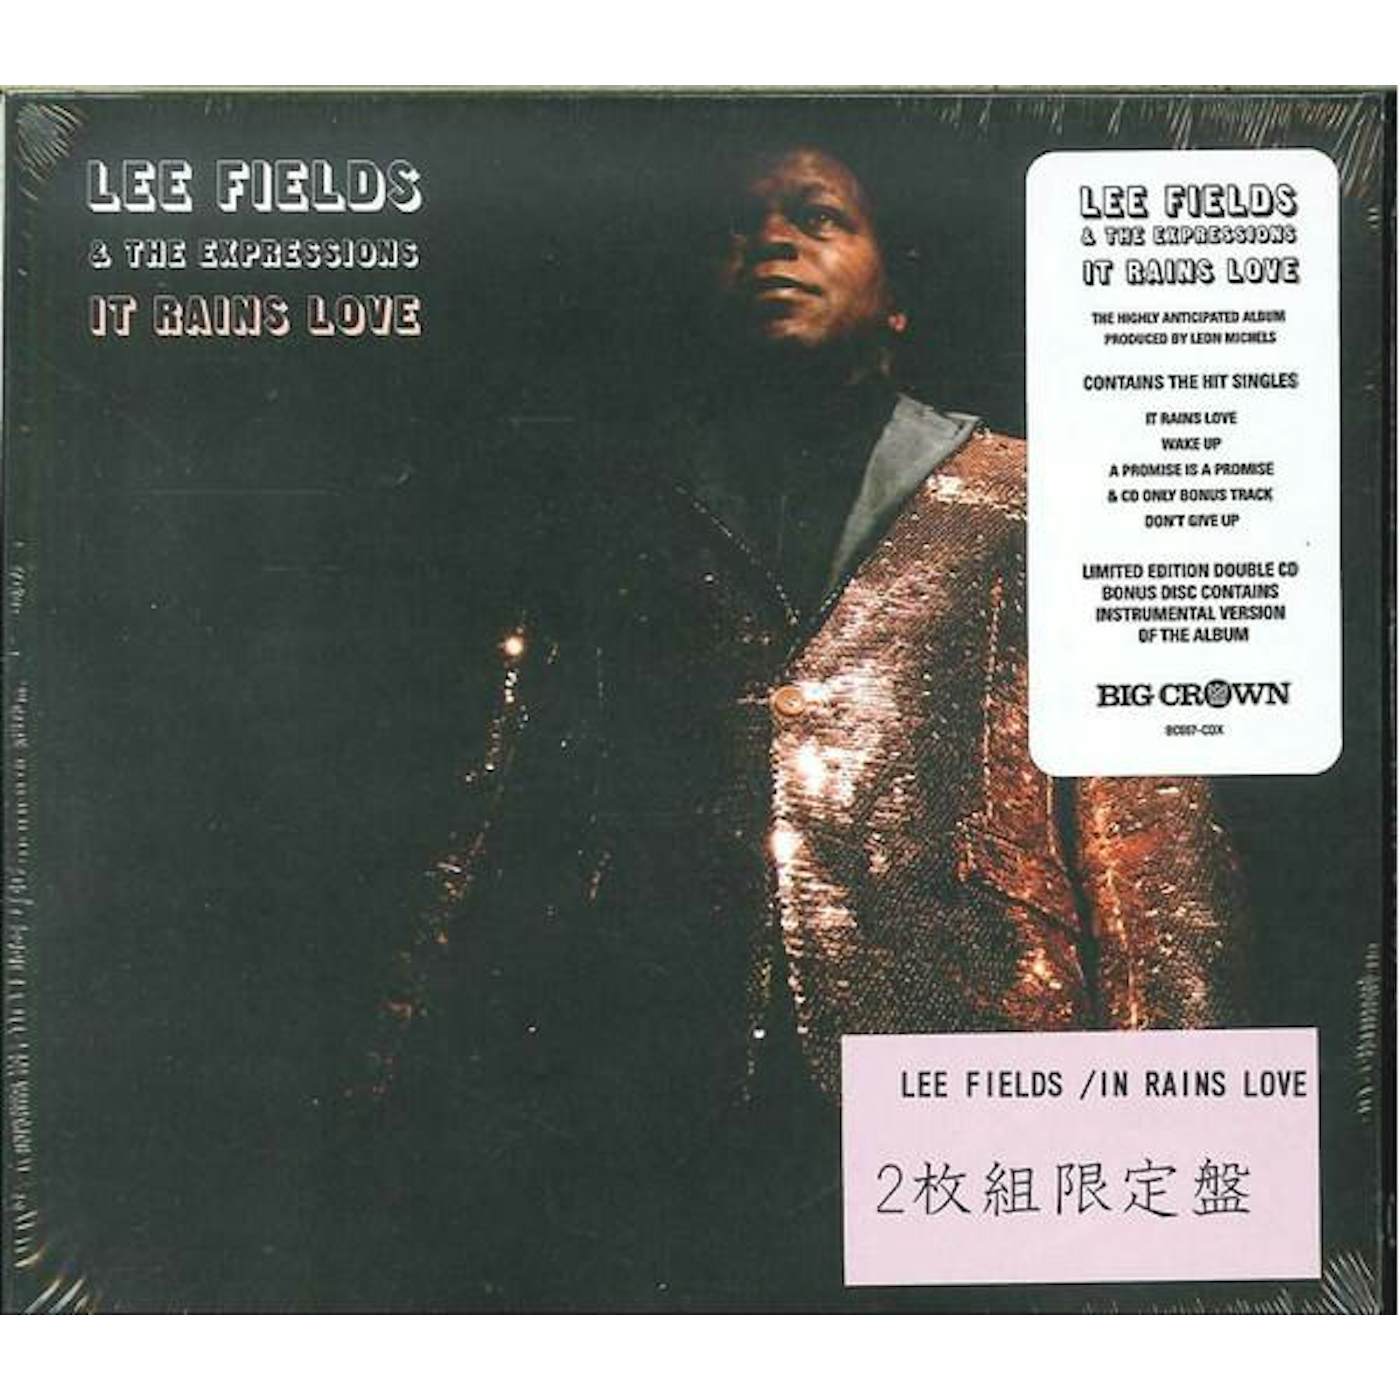 Lee Fields & The Expressions IT RAINS LOVE CD